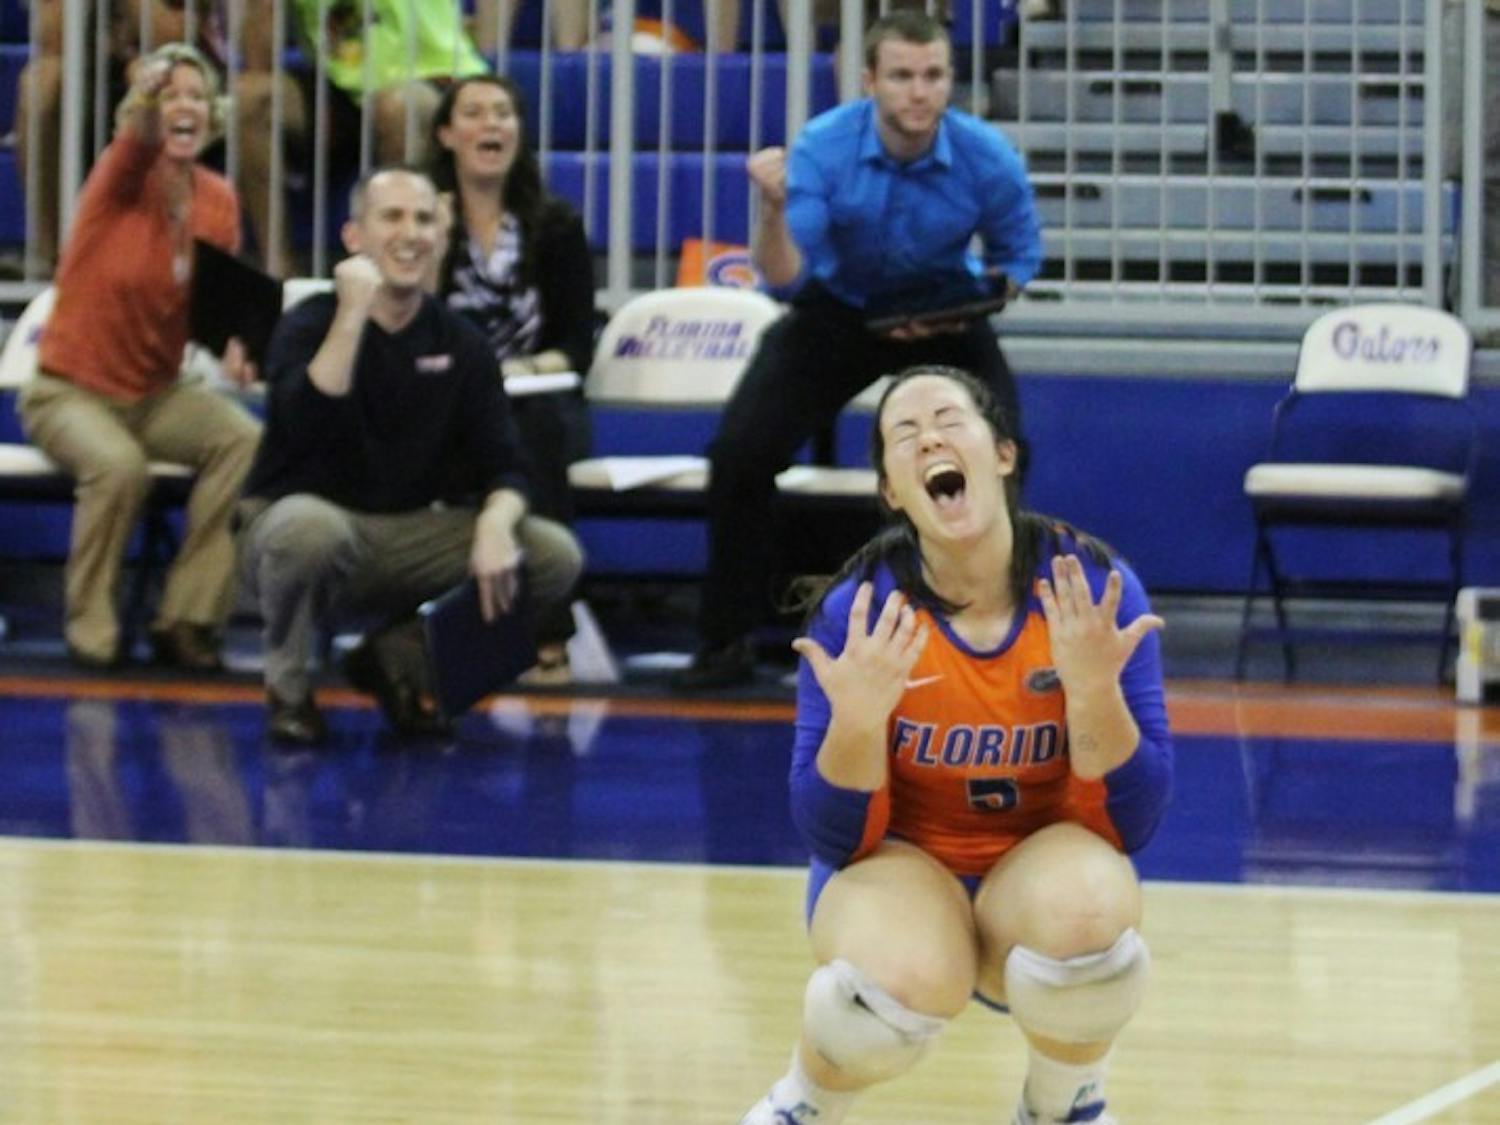 Libero Taylor Unroe celebrates after recording an ace in a 3-0 sweep of Missouri. The sophomore had 15 digs and 5 assists against the Tigers on Friday.